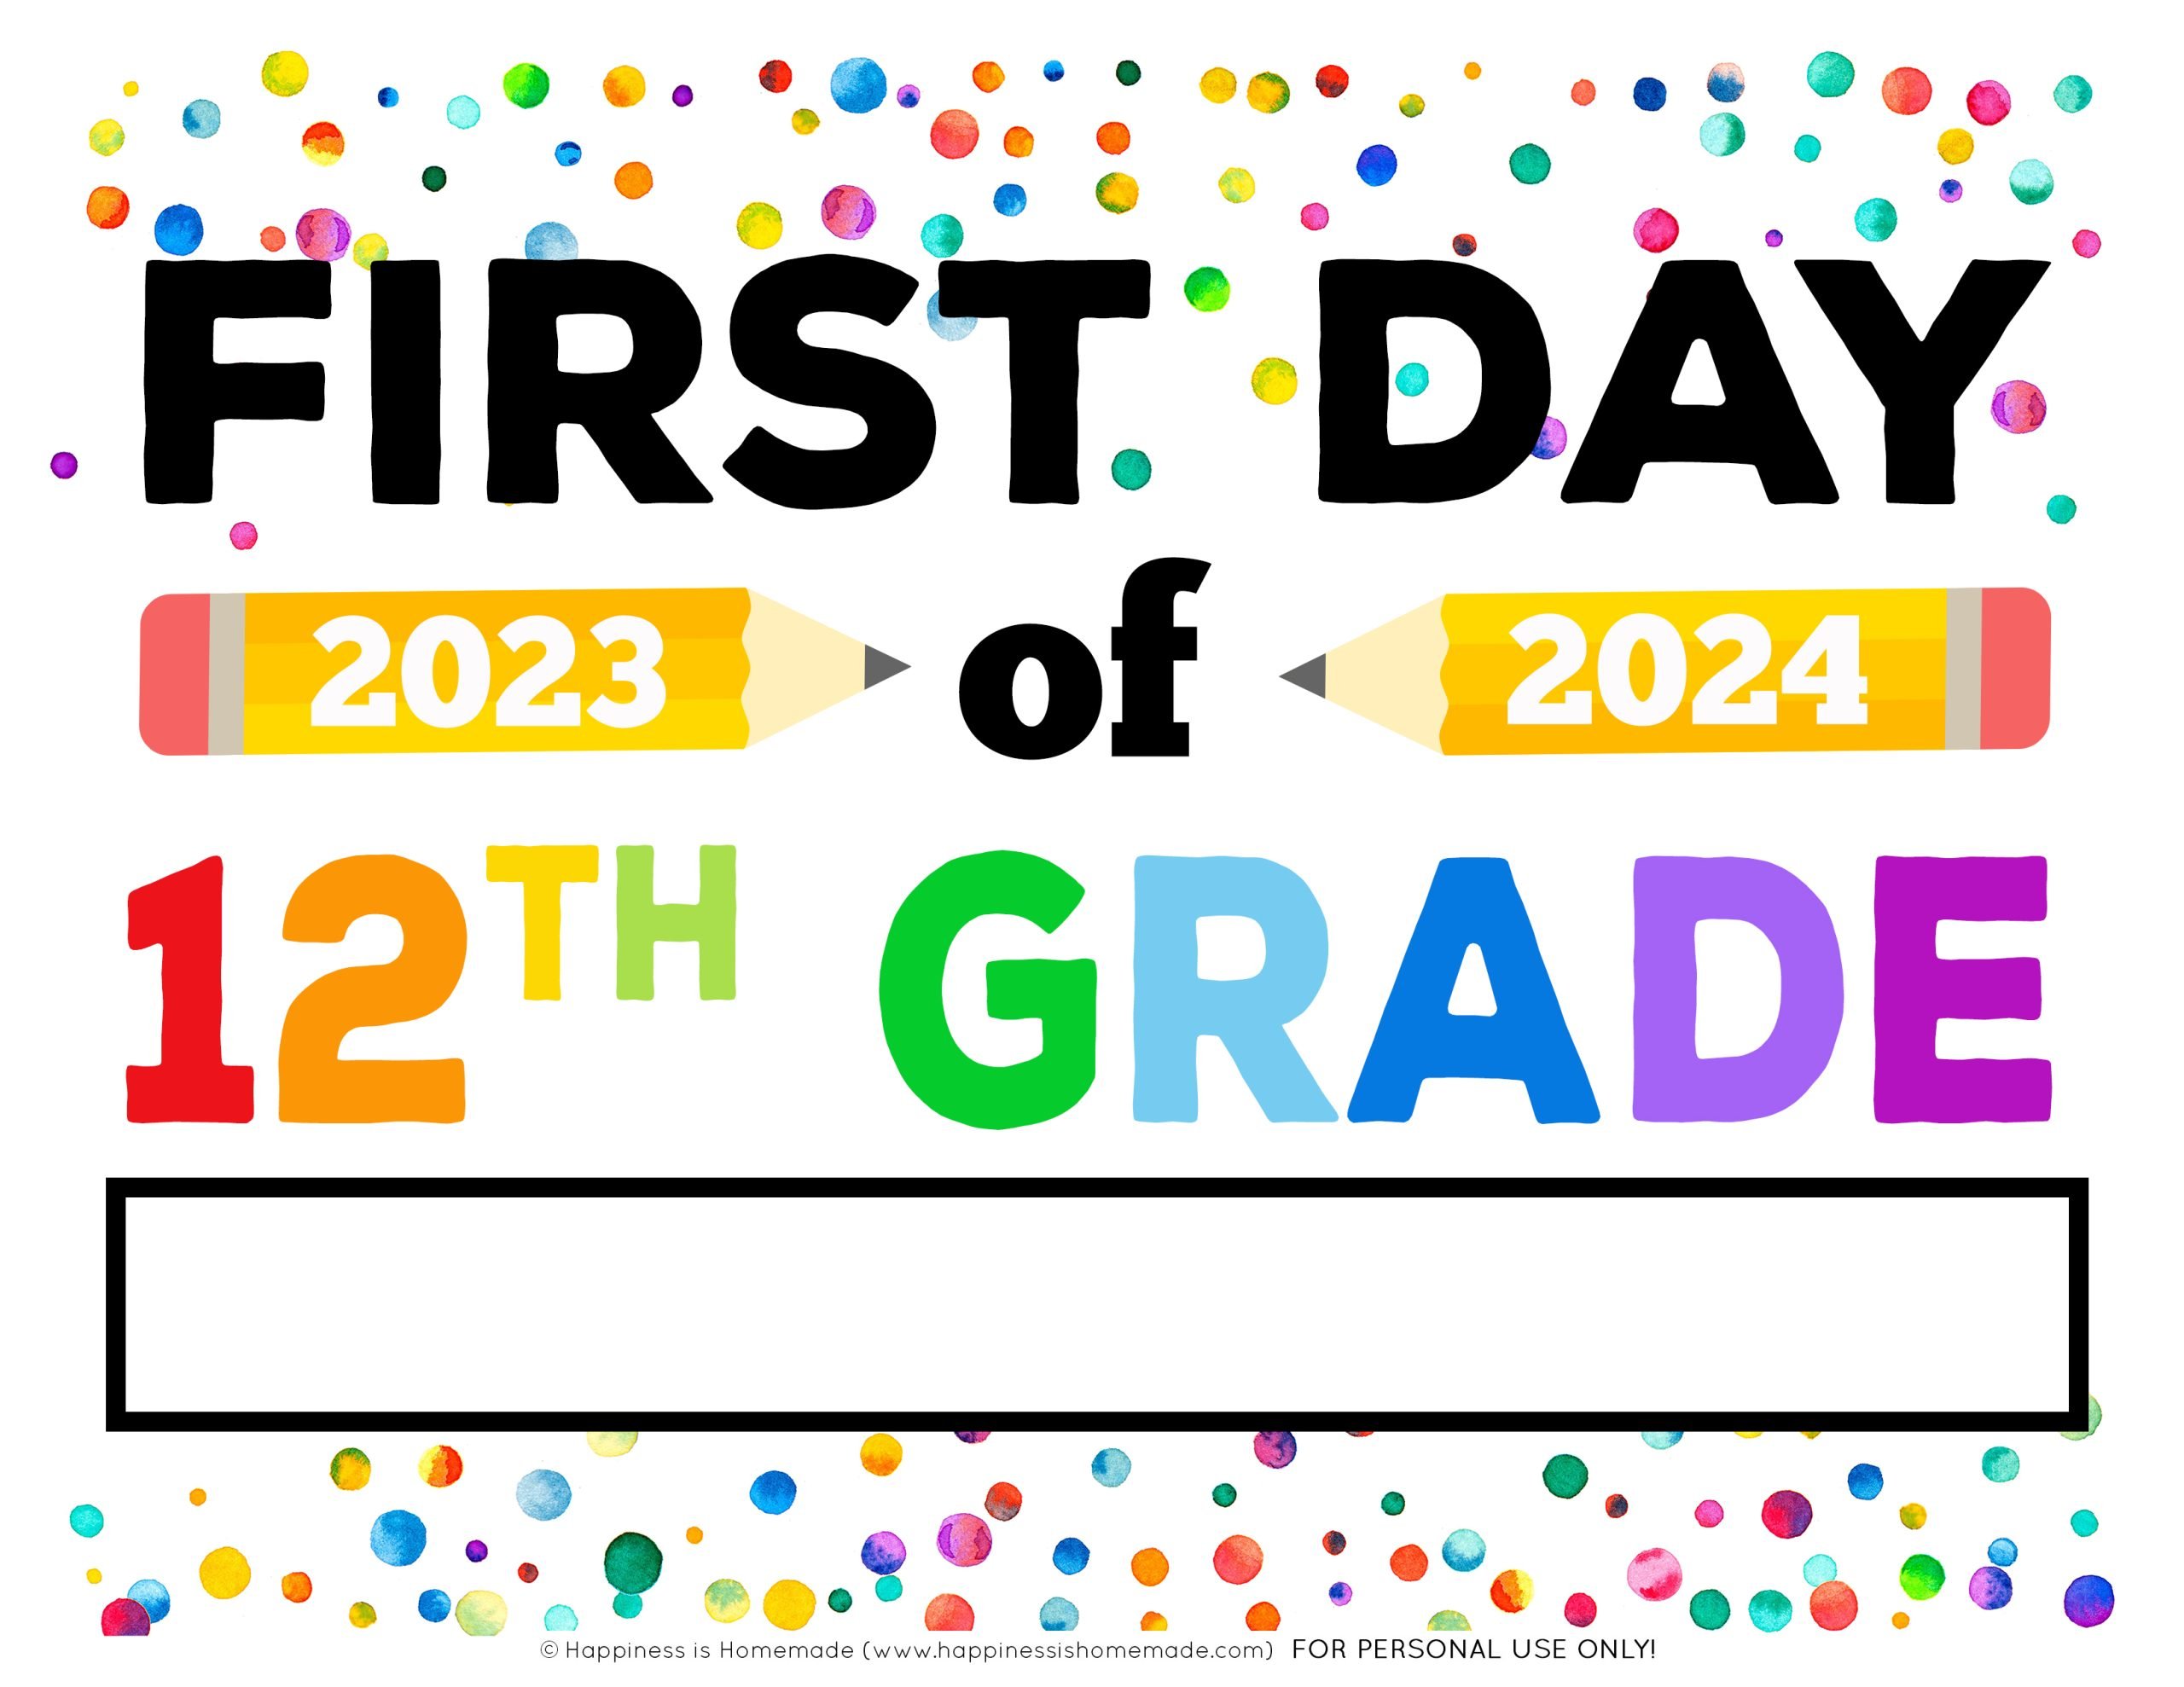 Graphic of customizable Free Printable First Day of school sign 2023 - 2024